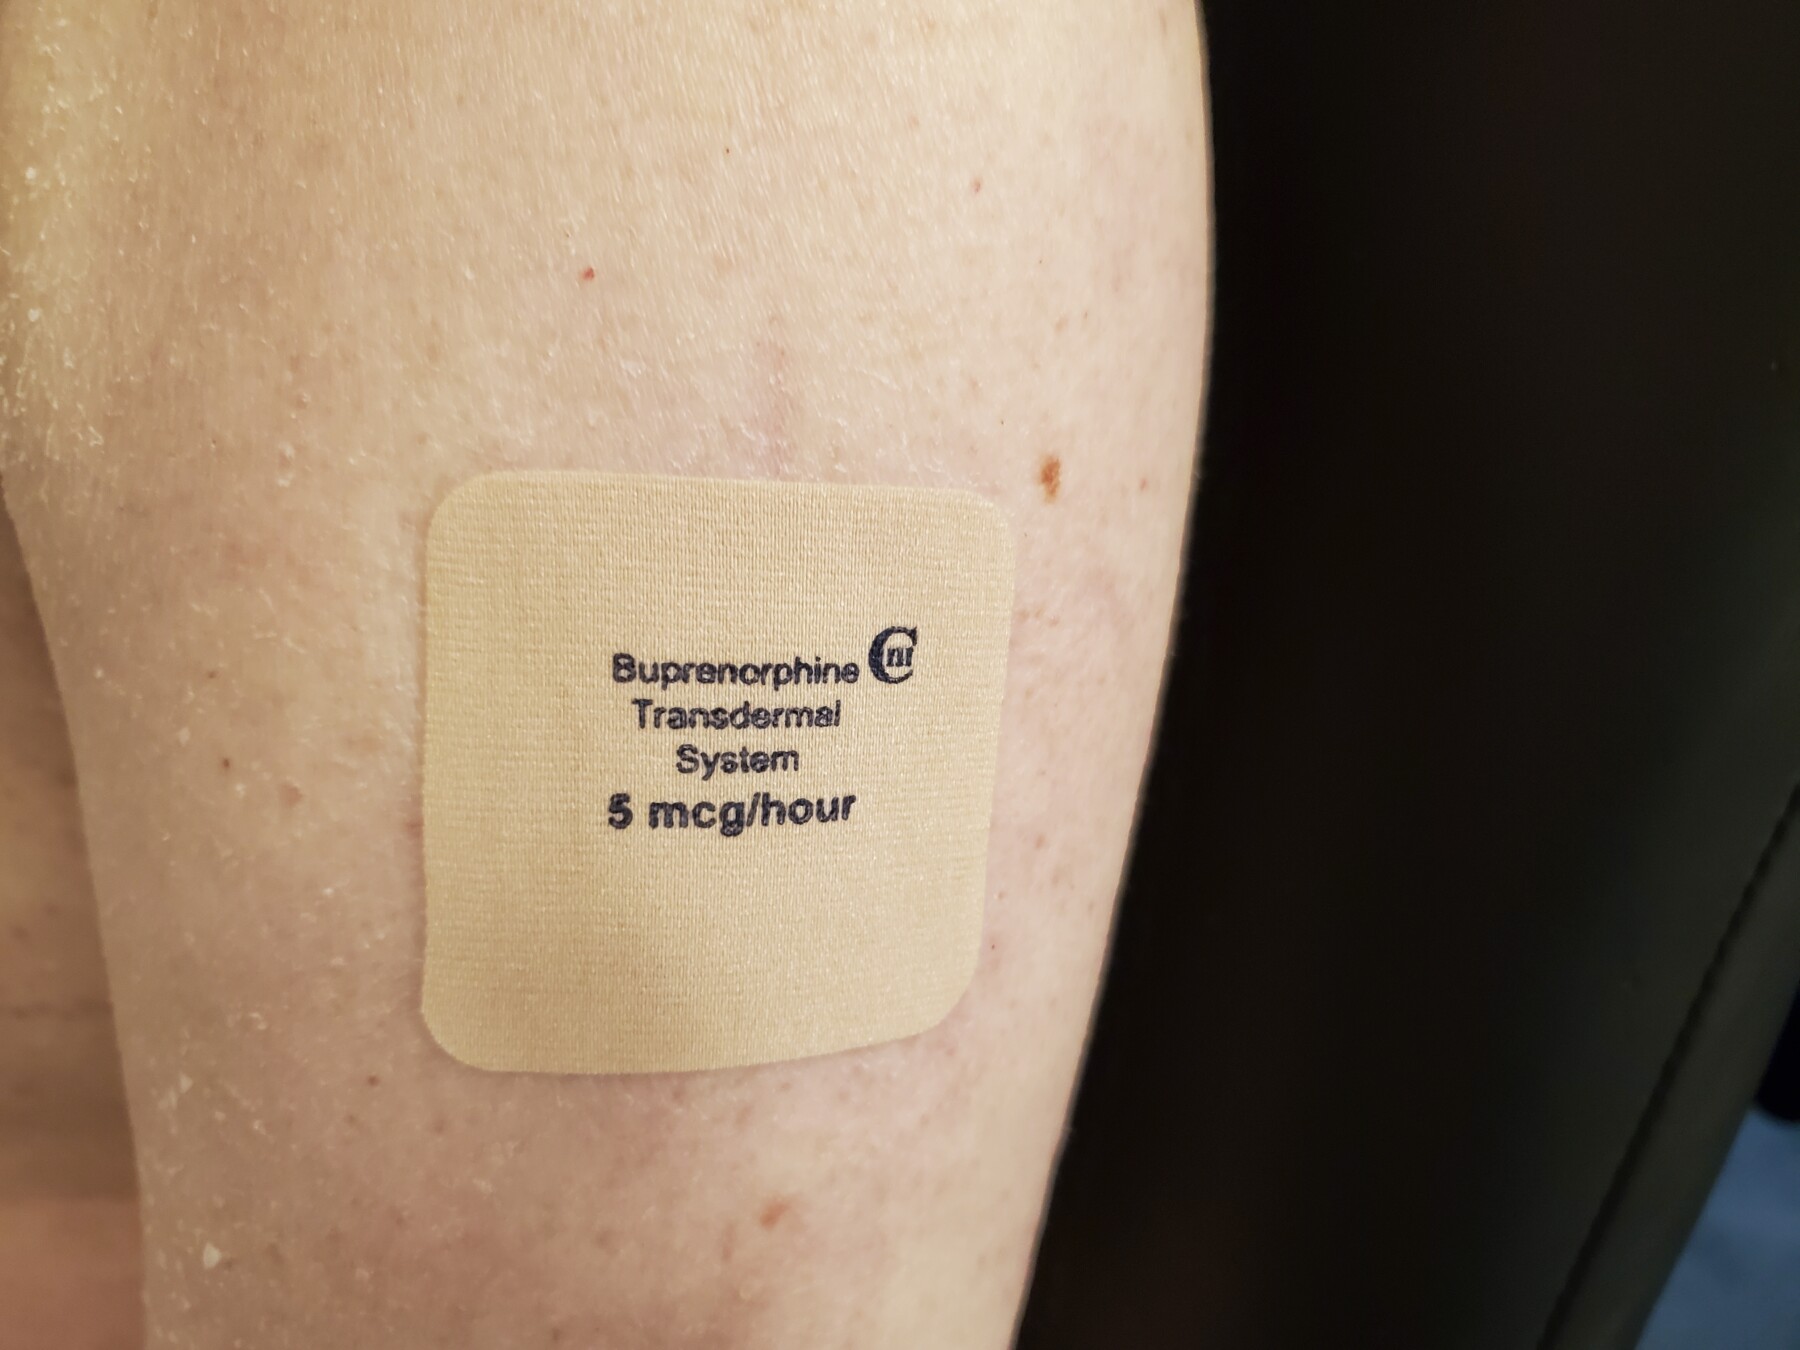 A Bupenorphine transdermal patch is shown on someone's arm